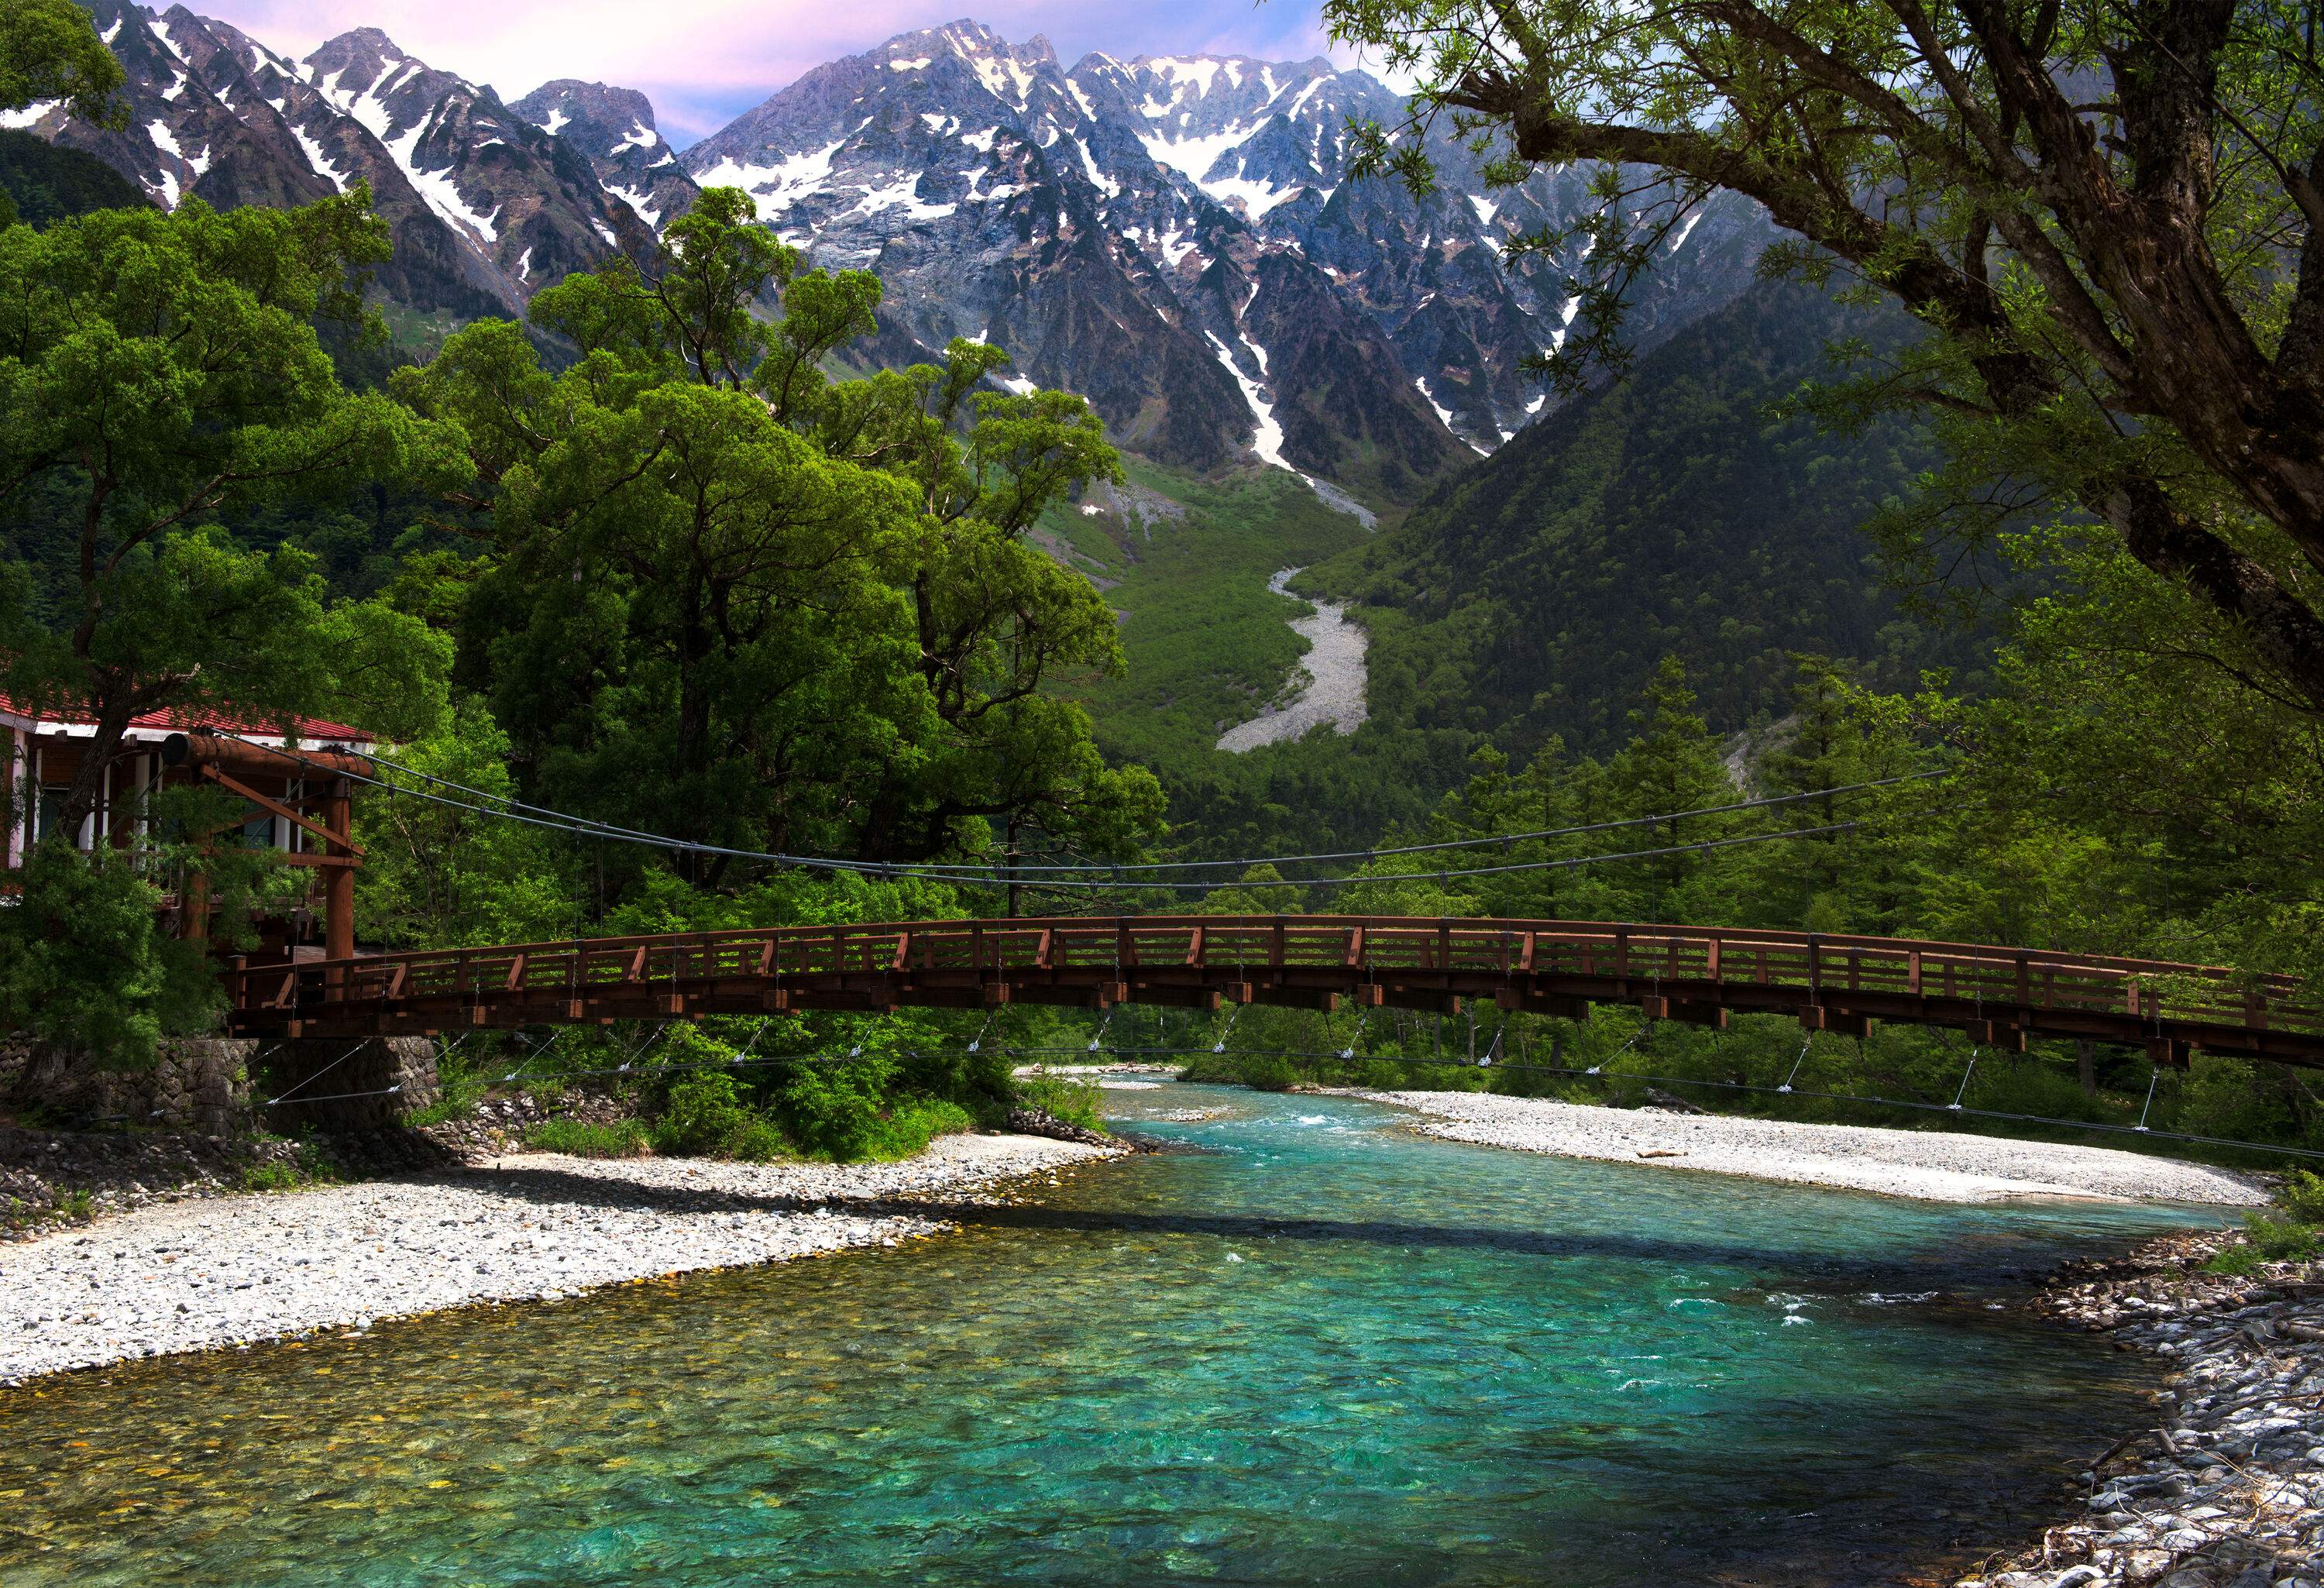 A semi-arch wooden suspension bridge over a crystal clear river with picturesque steep, sharp pointed mountains in the backdrop.